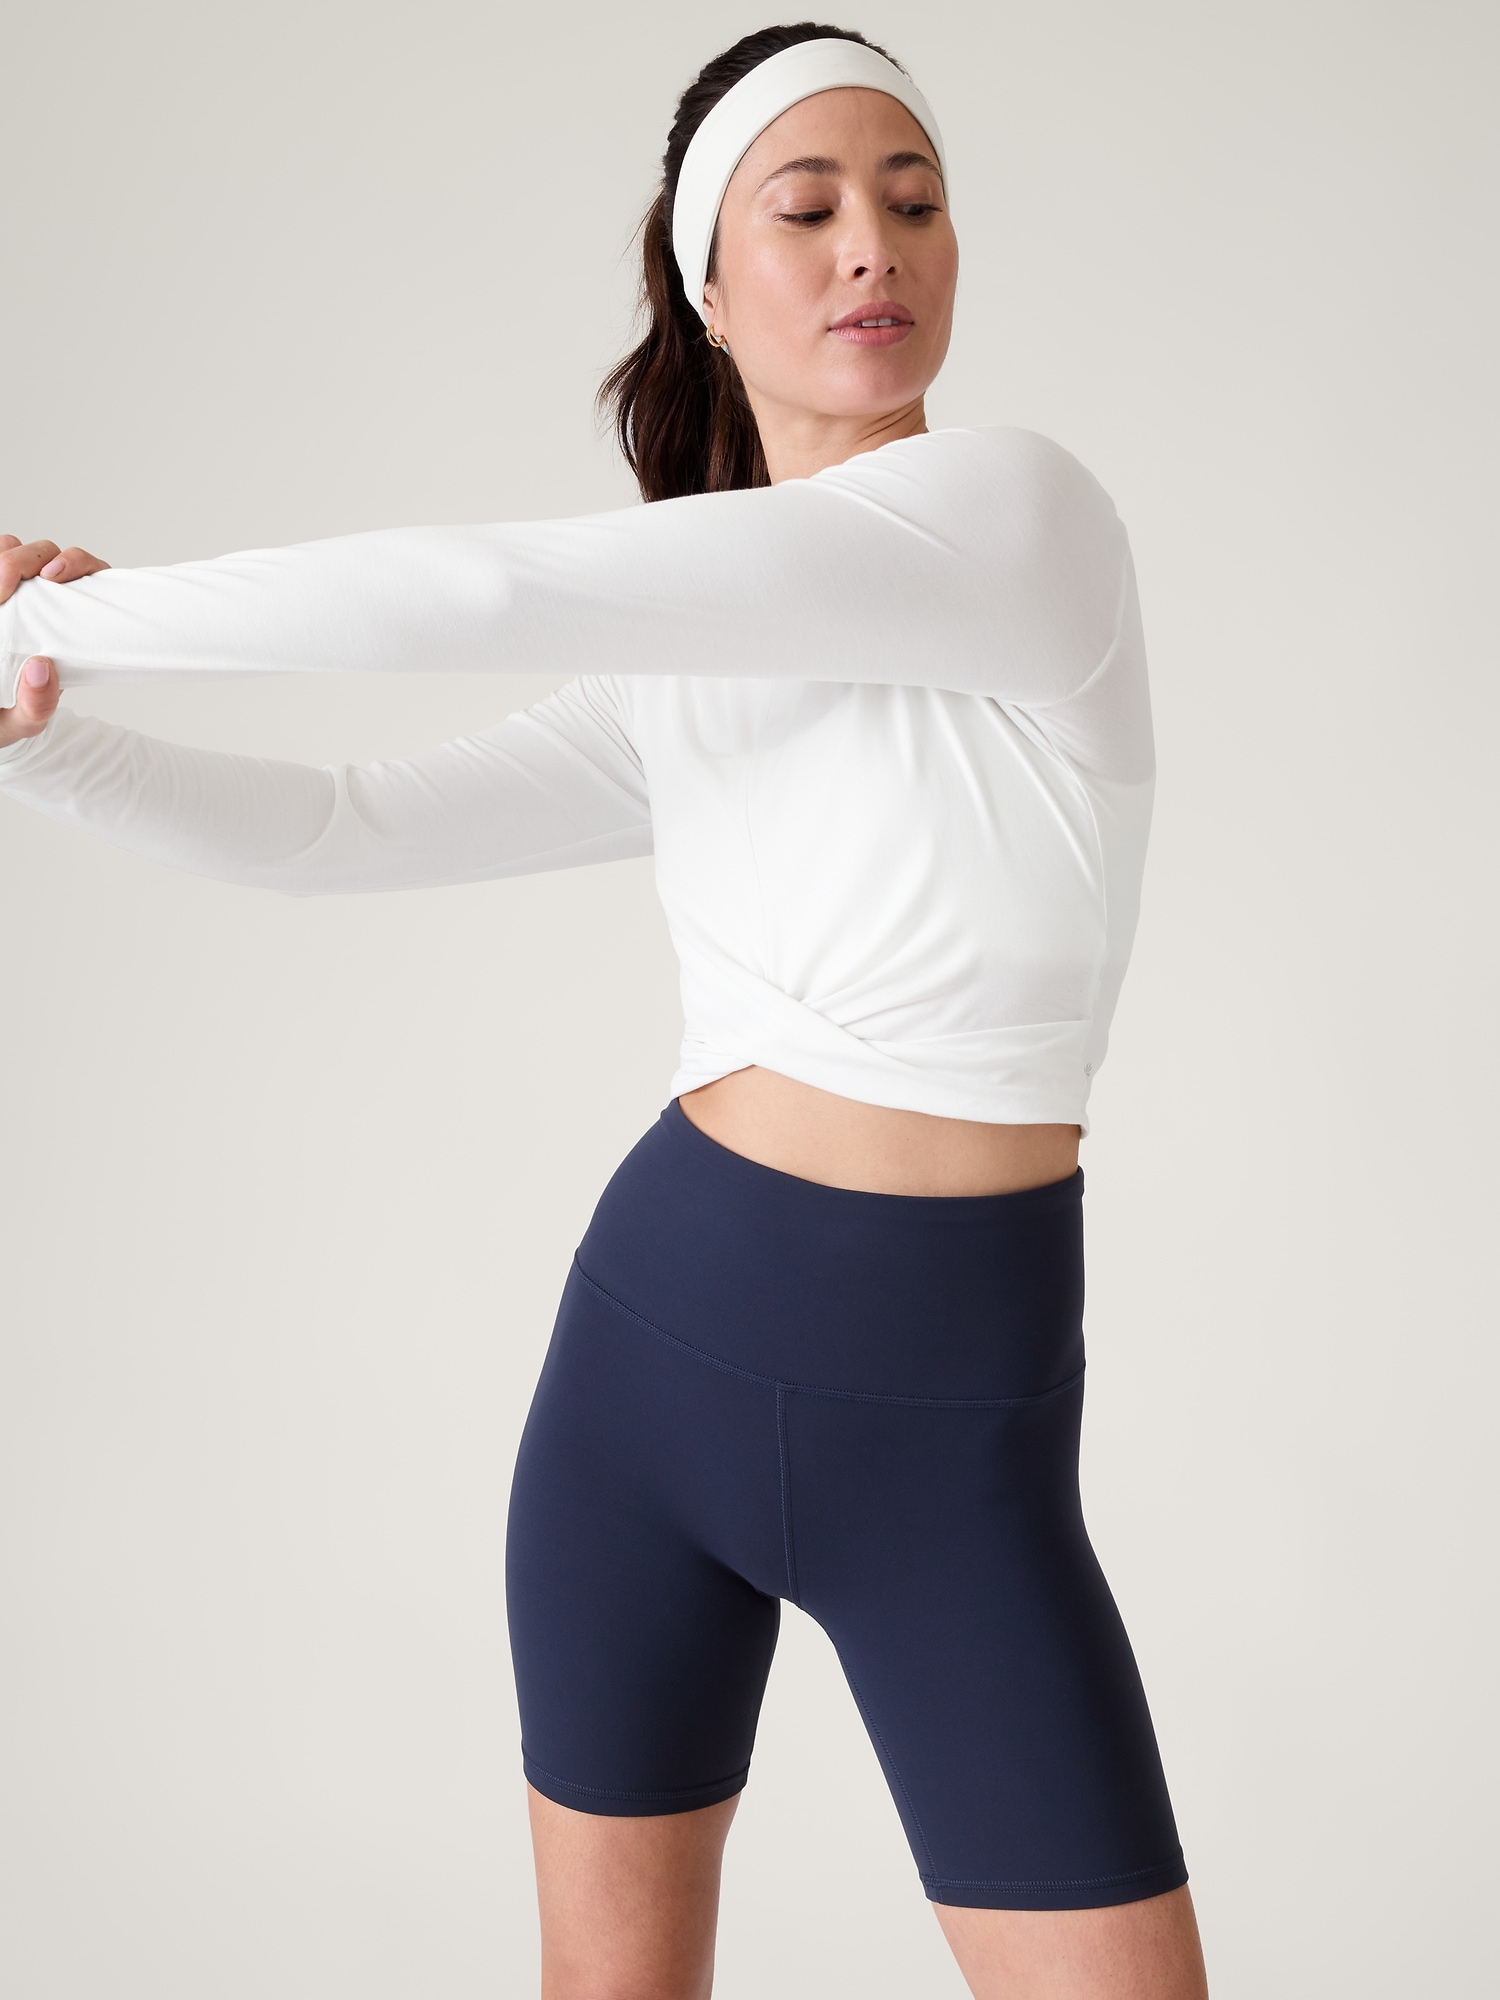 Athleta With Ease Twist Top In Bright White